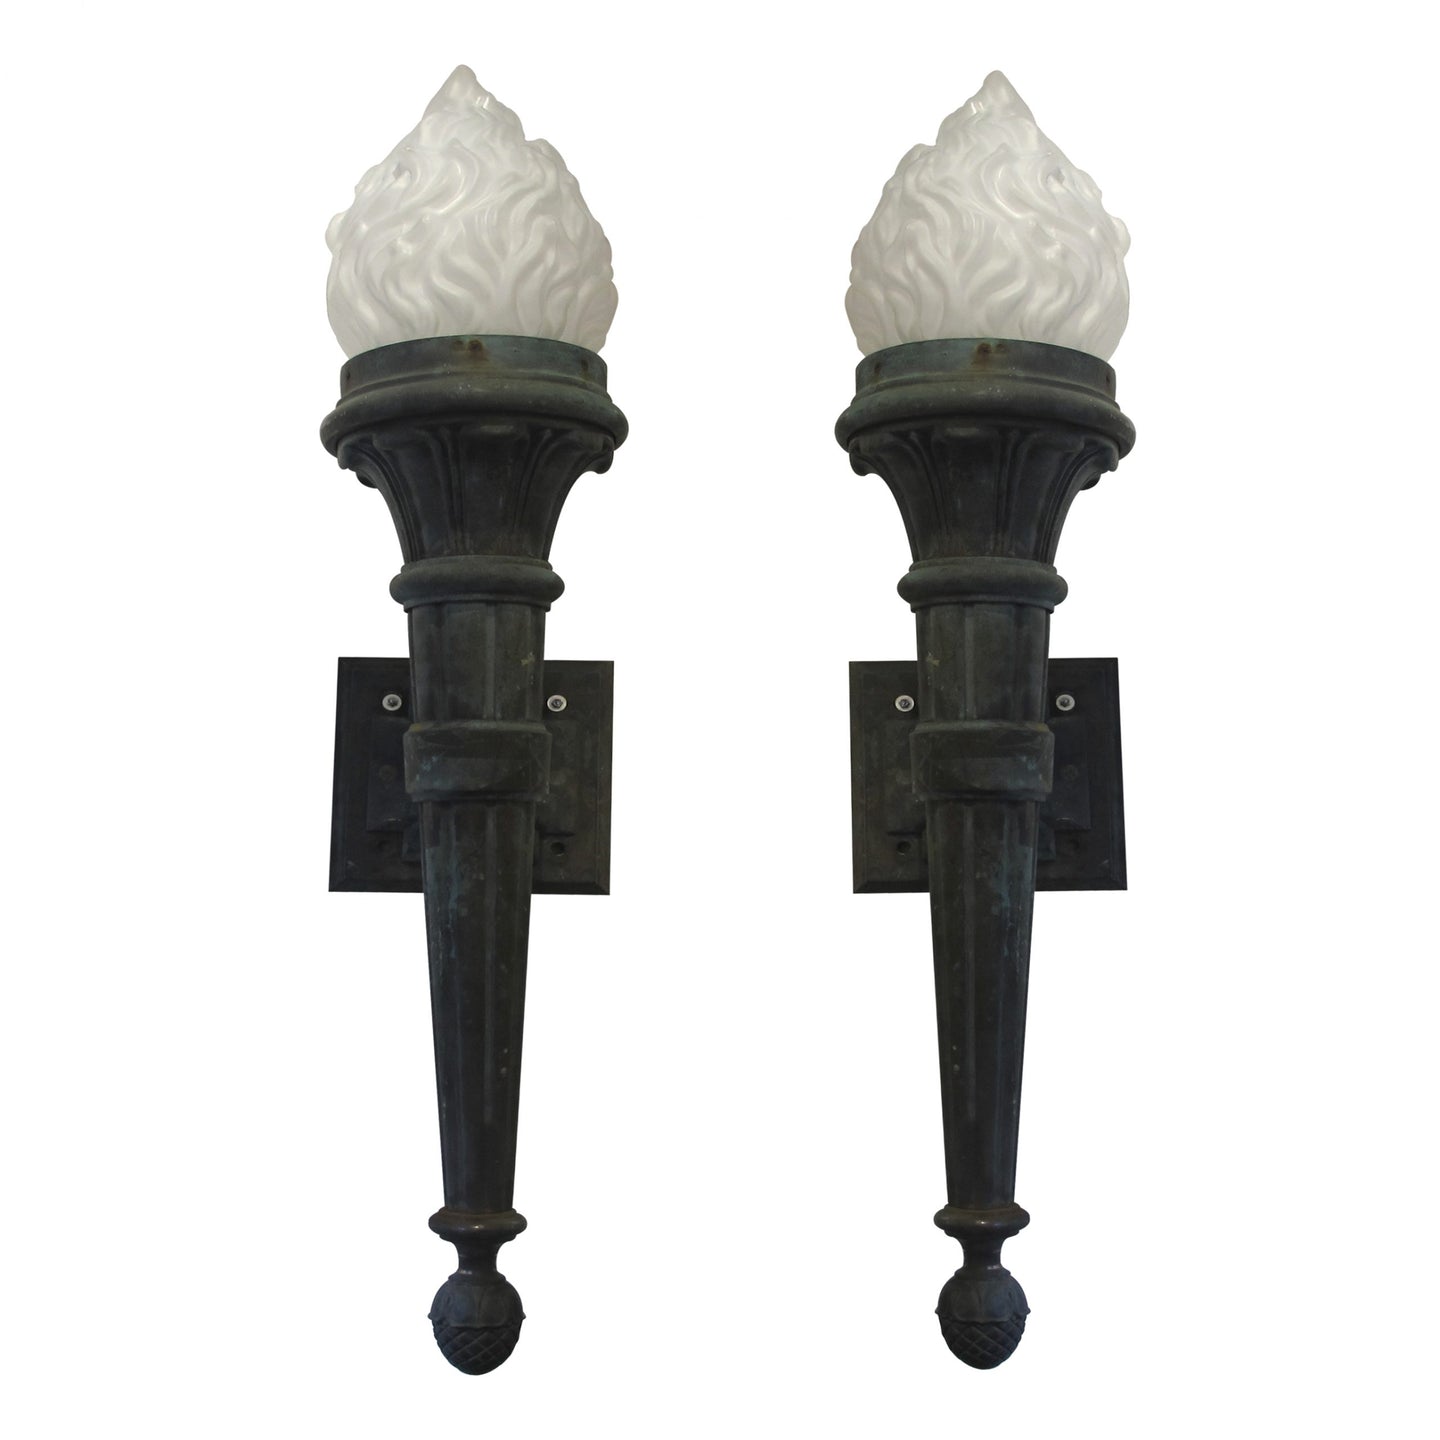 Pair of large bronze torches, English C. 1880